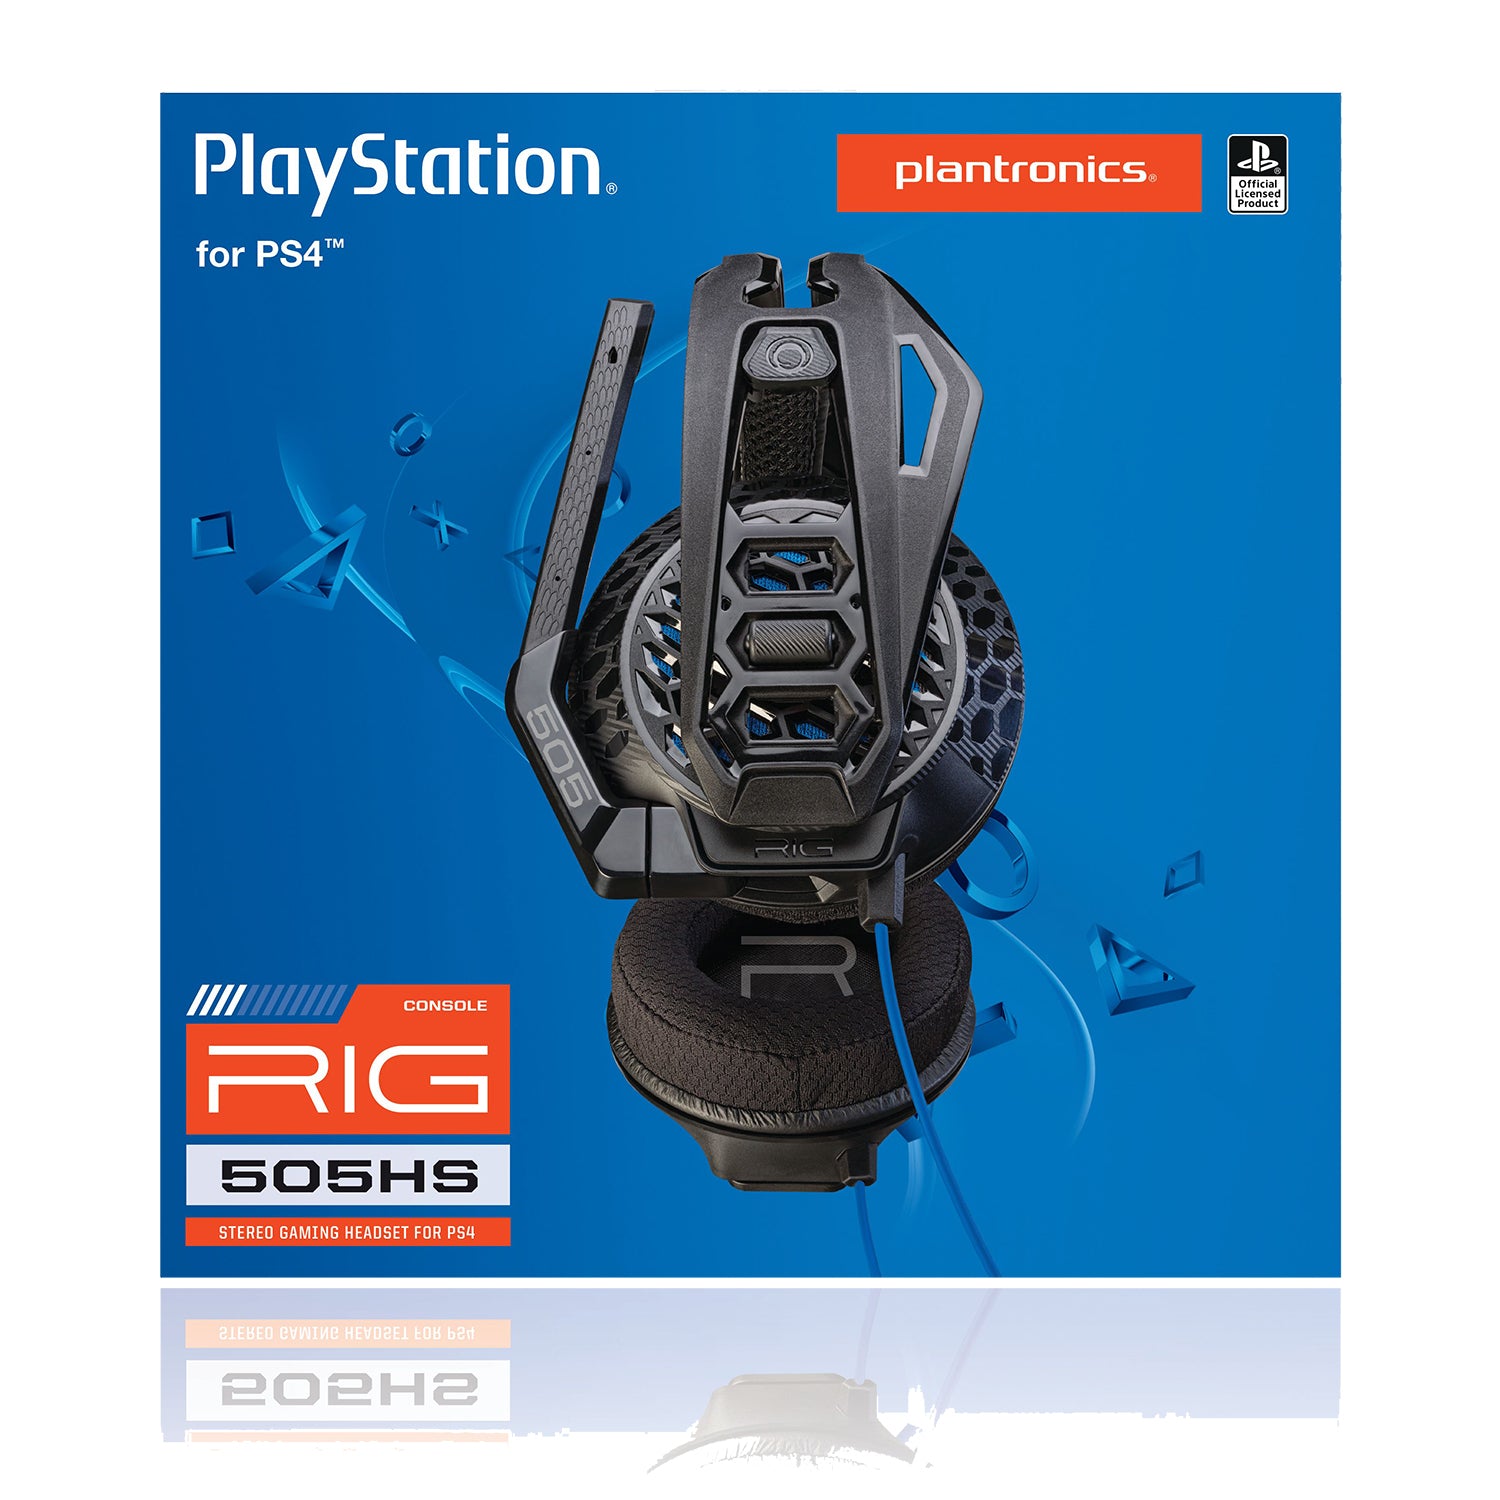 Sony Playstation 5 Disc Version with Plantronics RIG 505 HS Gaming Headset Bundle - Pro-Distributing